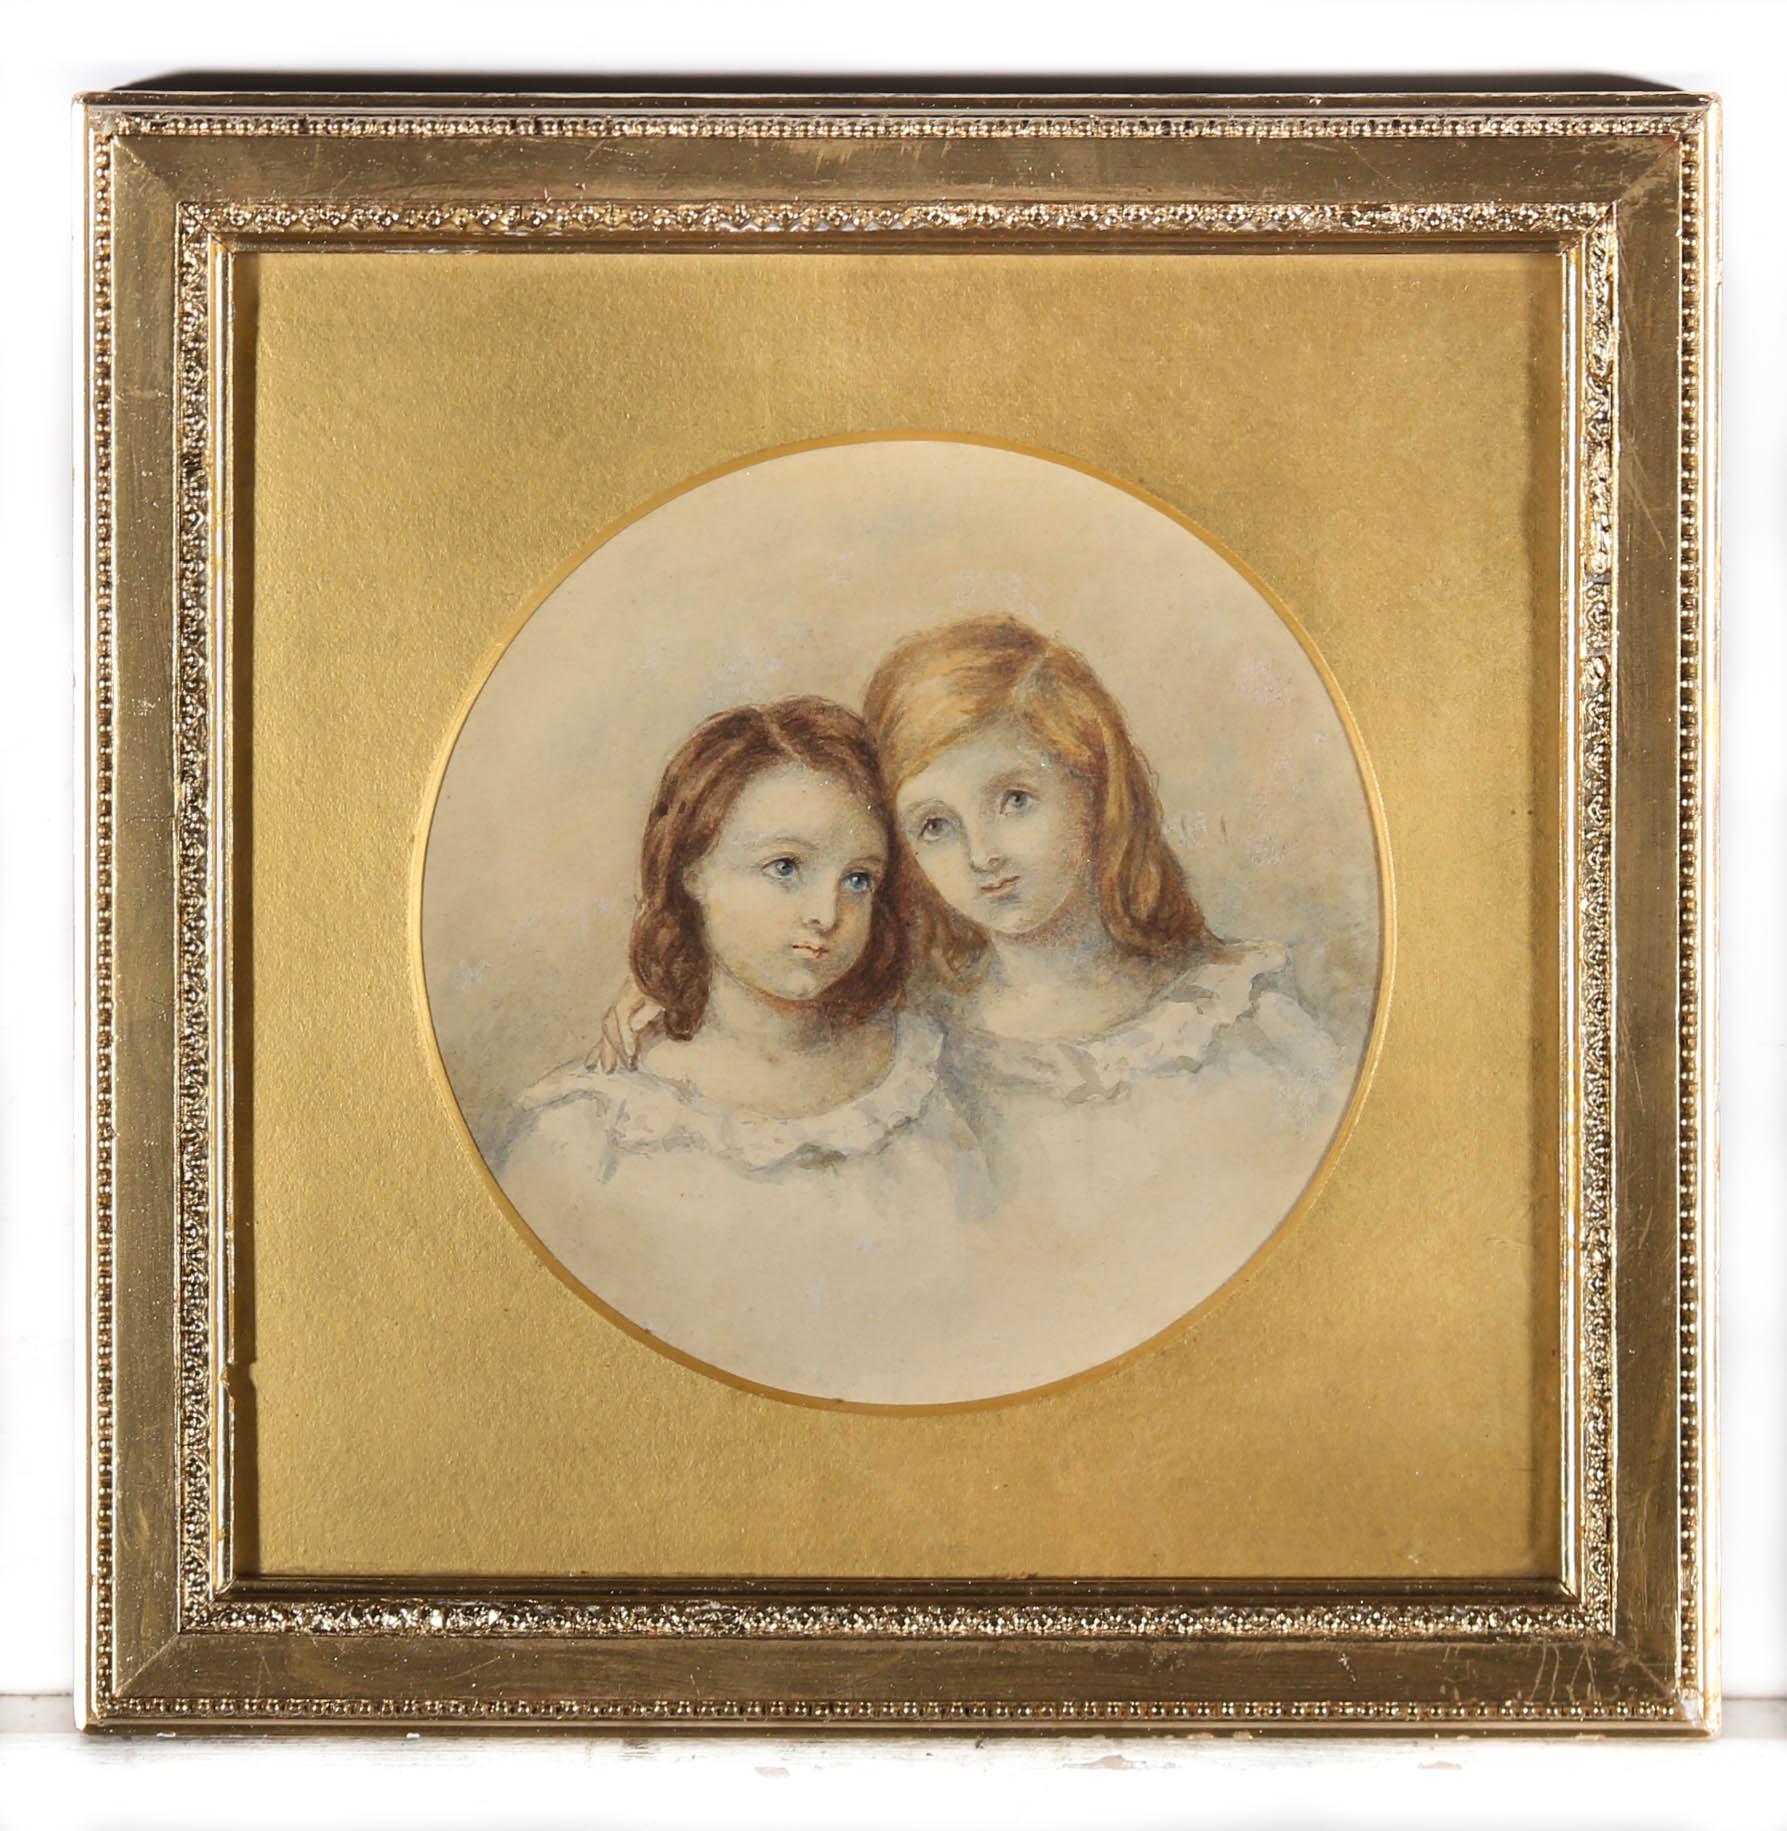 A fine watercolour portrait depicting two young sisters in matching gowns. The artist captures the children in delicate watercolour brush strokes showing their heads pressed together as they embrace,. Unsigned. Presented in a beaded gilt frame with